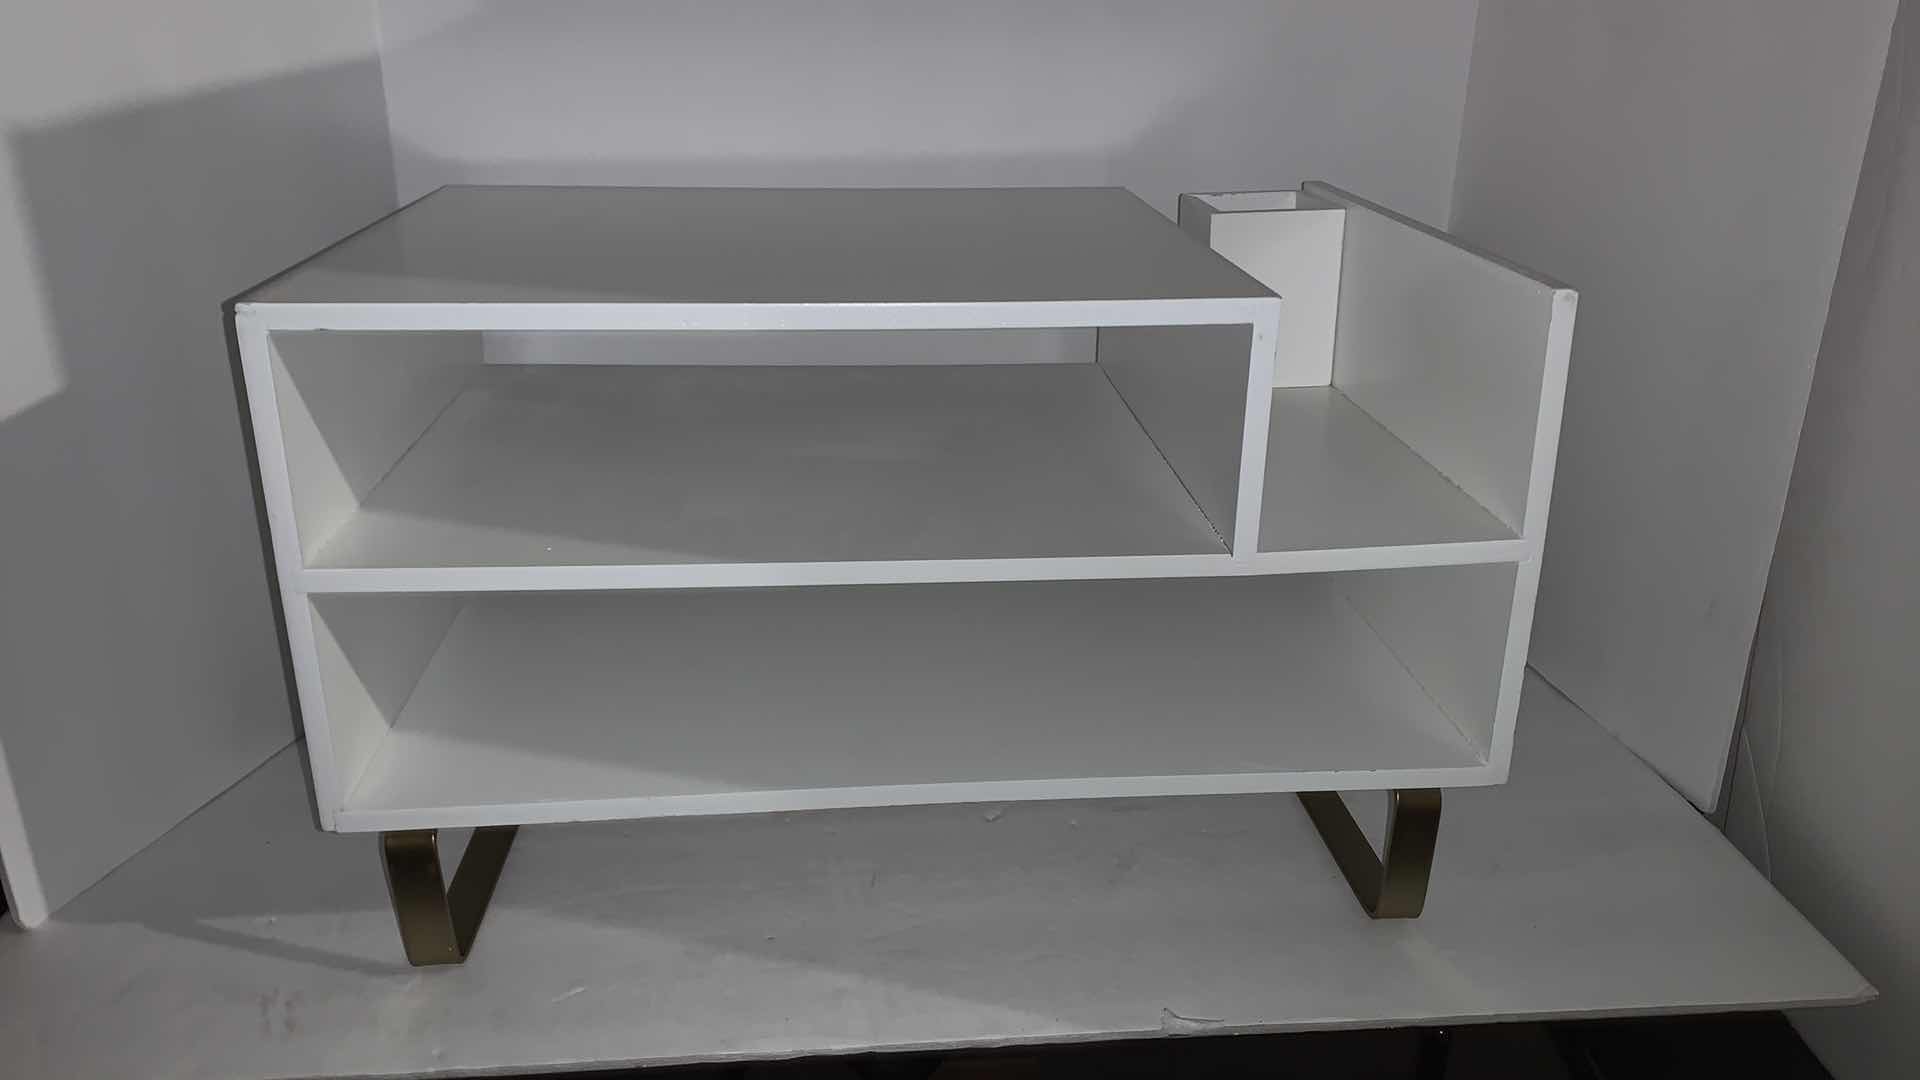 Photo 1 of CONTEMPORARY DESK ORGANIZER, WHITE WITH GOLD LEGS